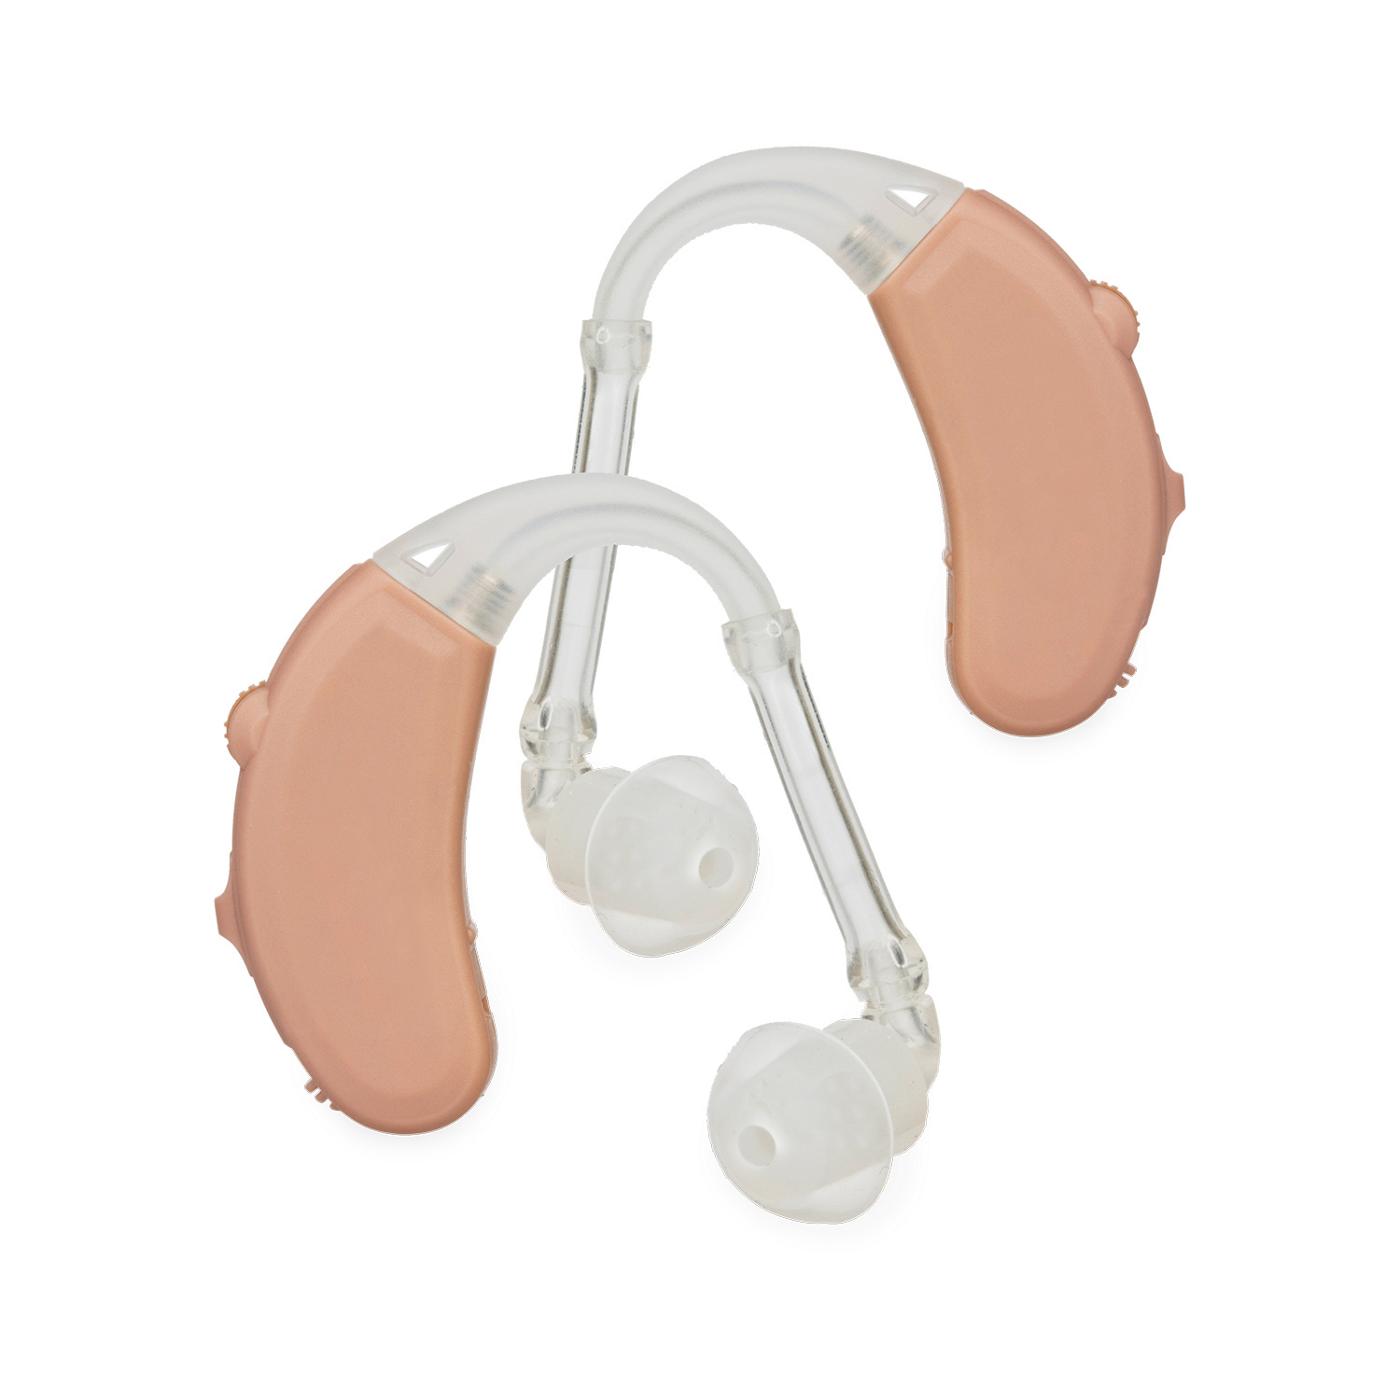 Lucid Audio Behind The Ear Enrich Pro Sound Hearing Aids; image 1 of 6